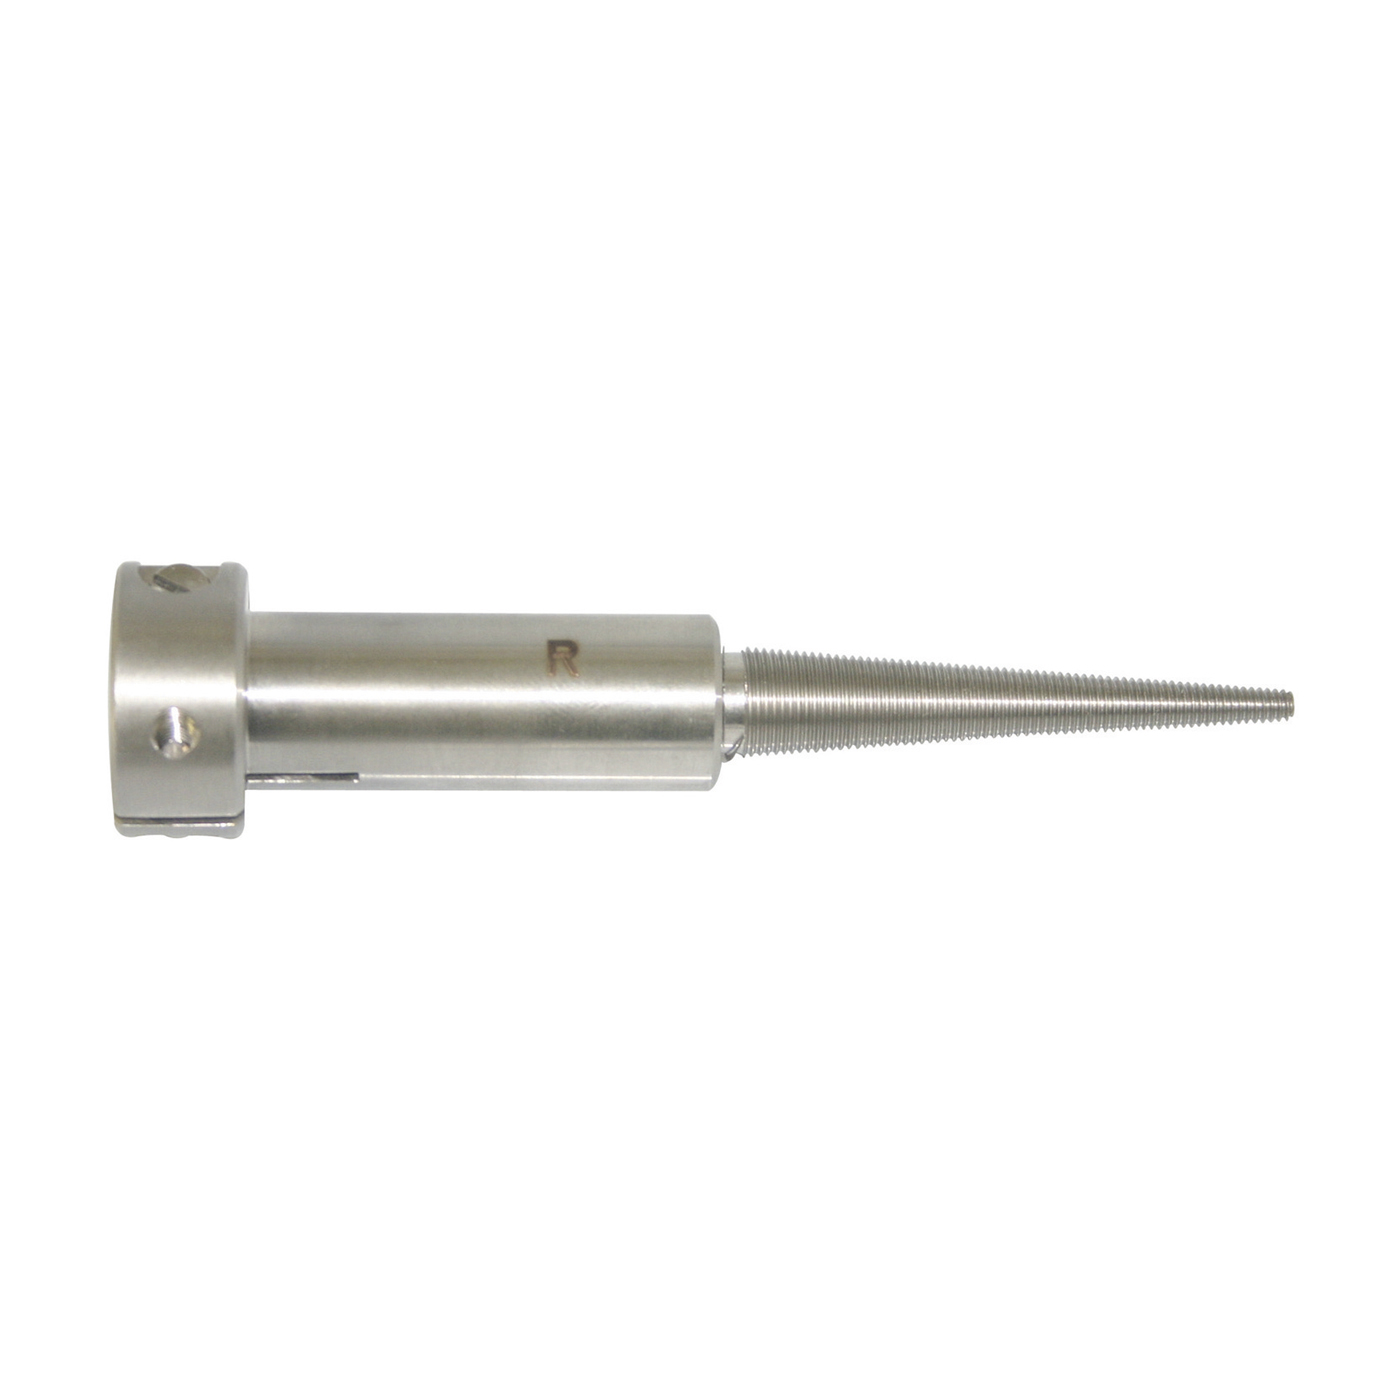 Spindle, Right, for PM 100.4 - 1 piece